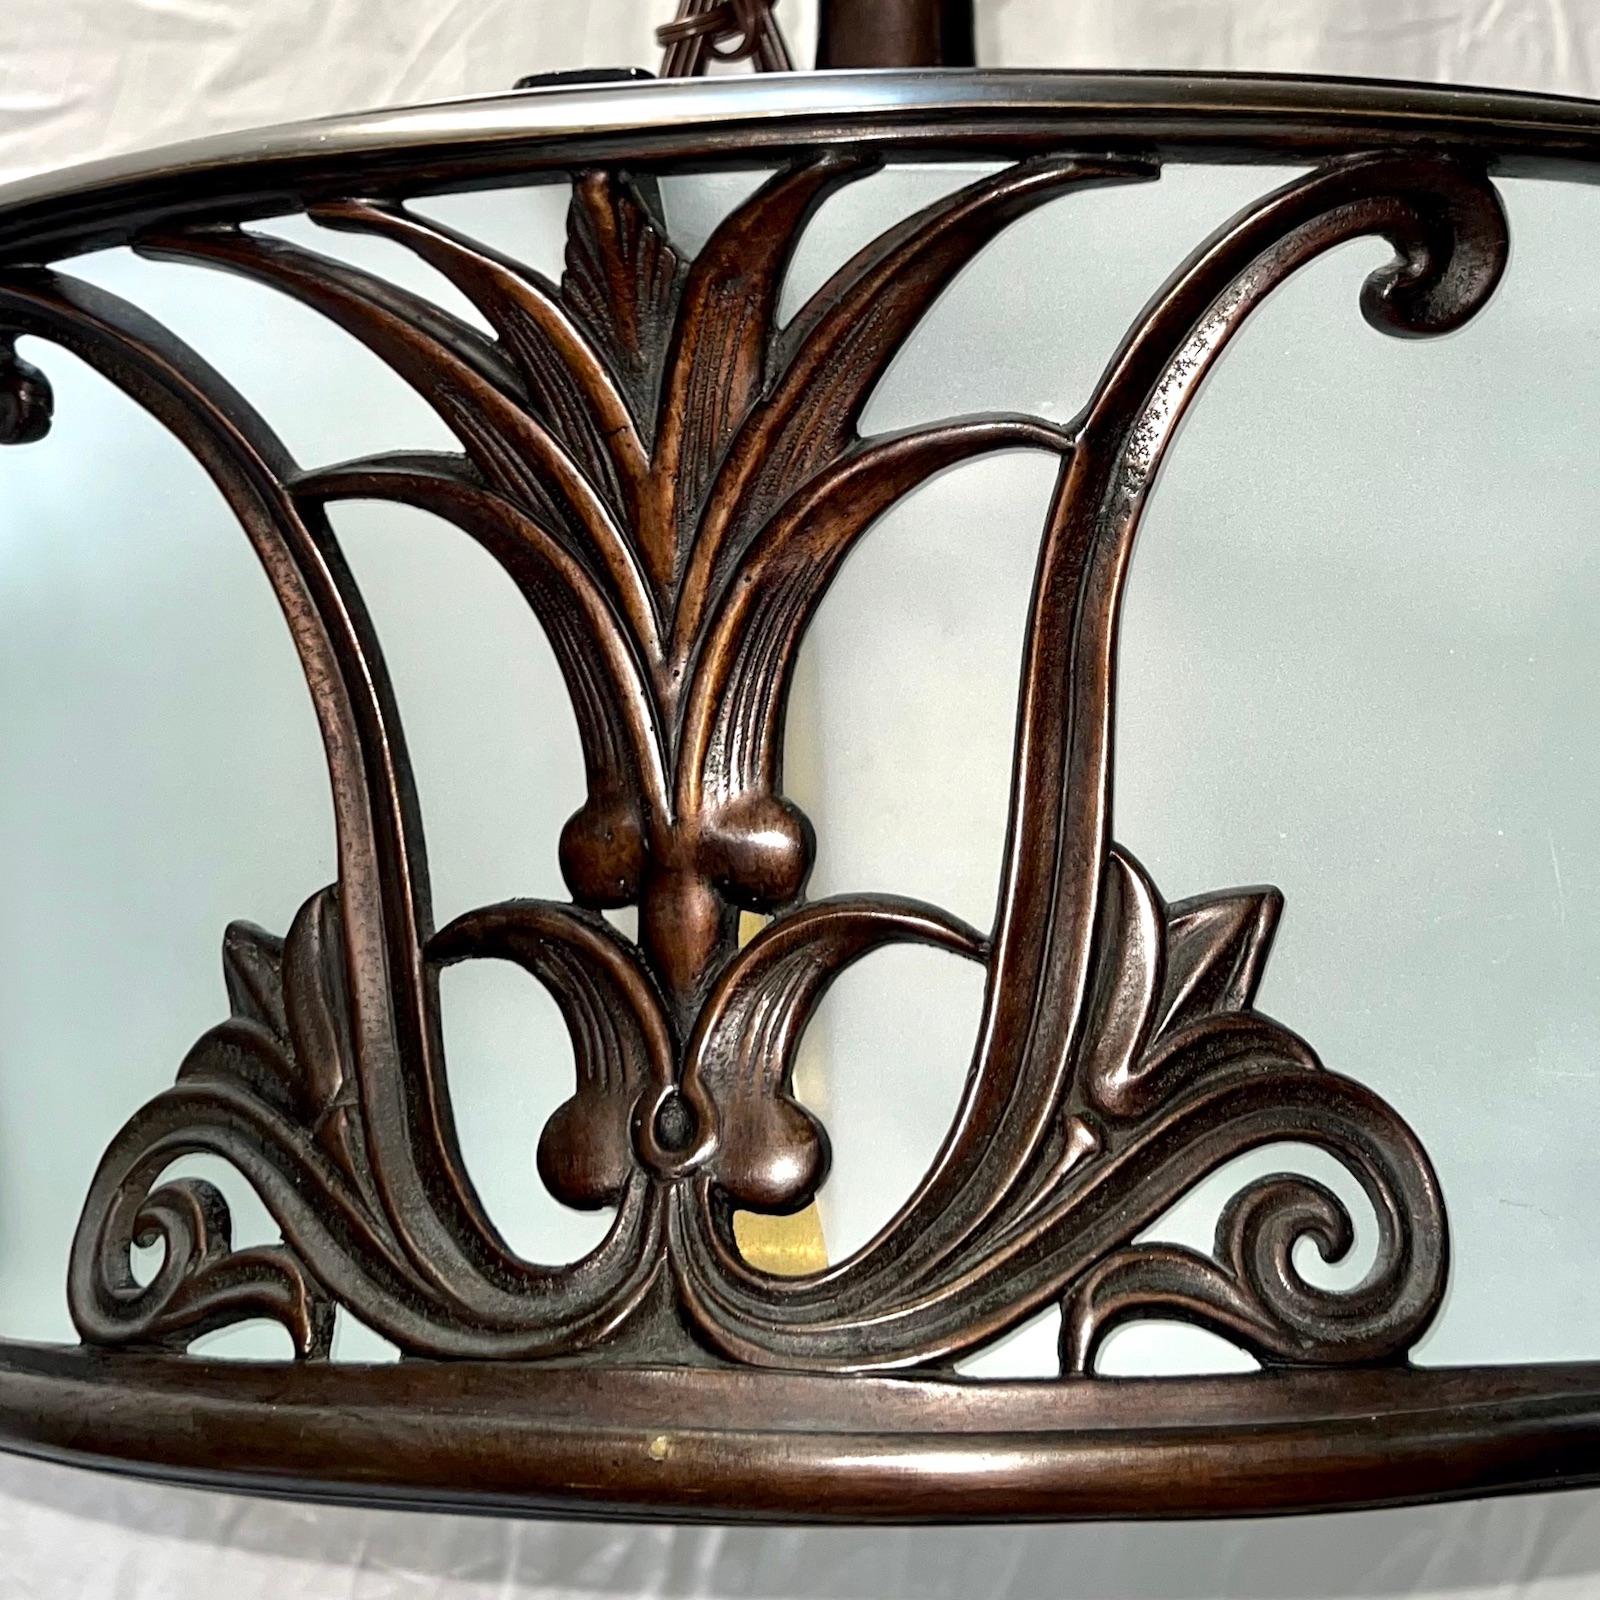 Pair of circa 1920's English bronze light fixtures with frosted glass insets and eight interior lights. Sold individually.
 
Measurements:
Drop: 26